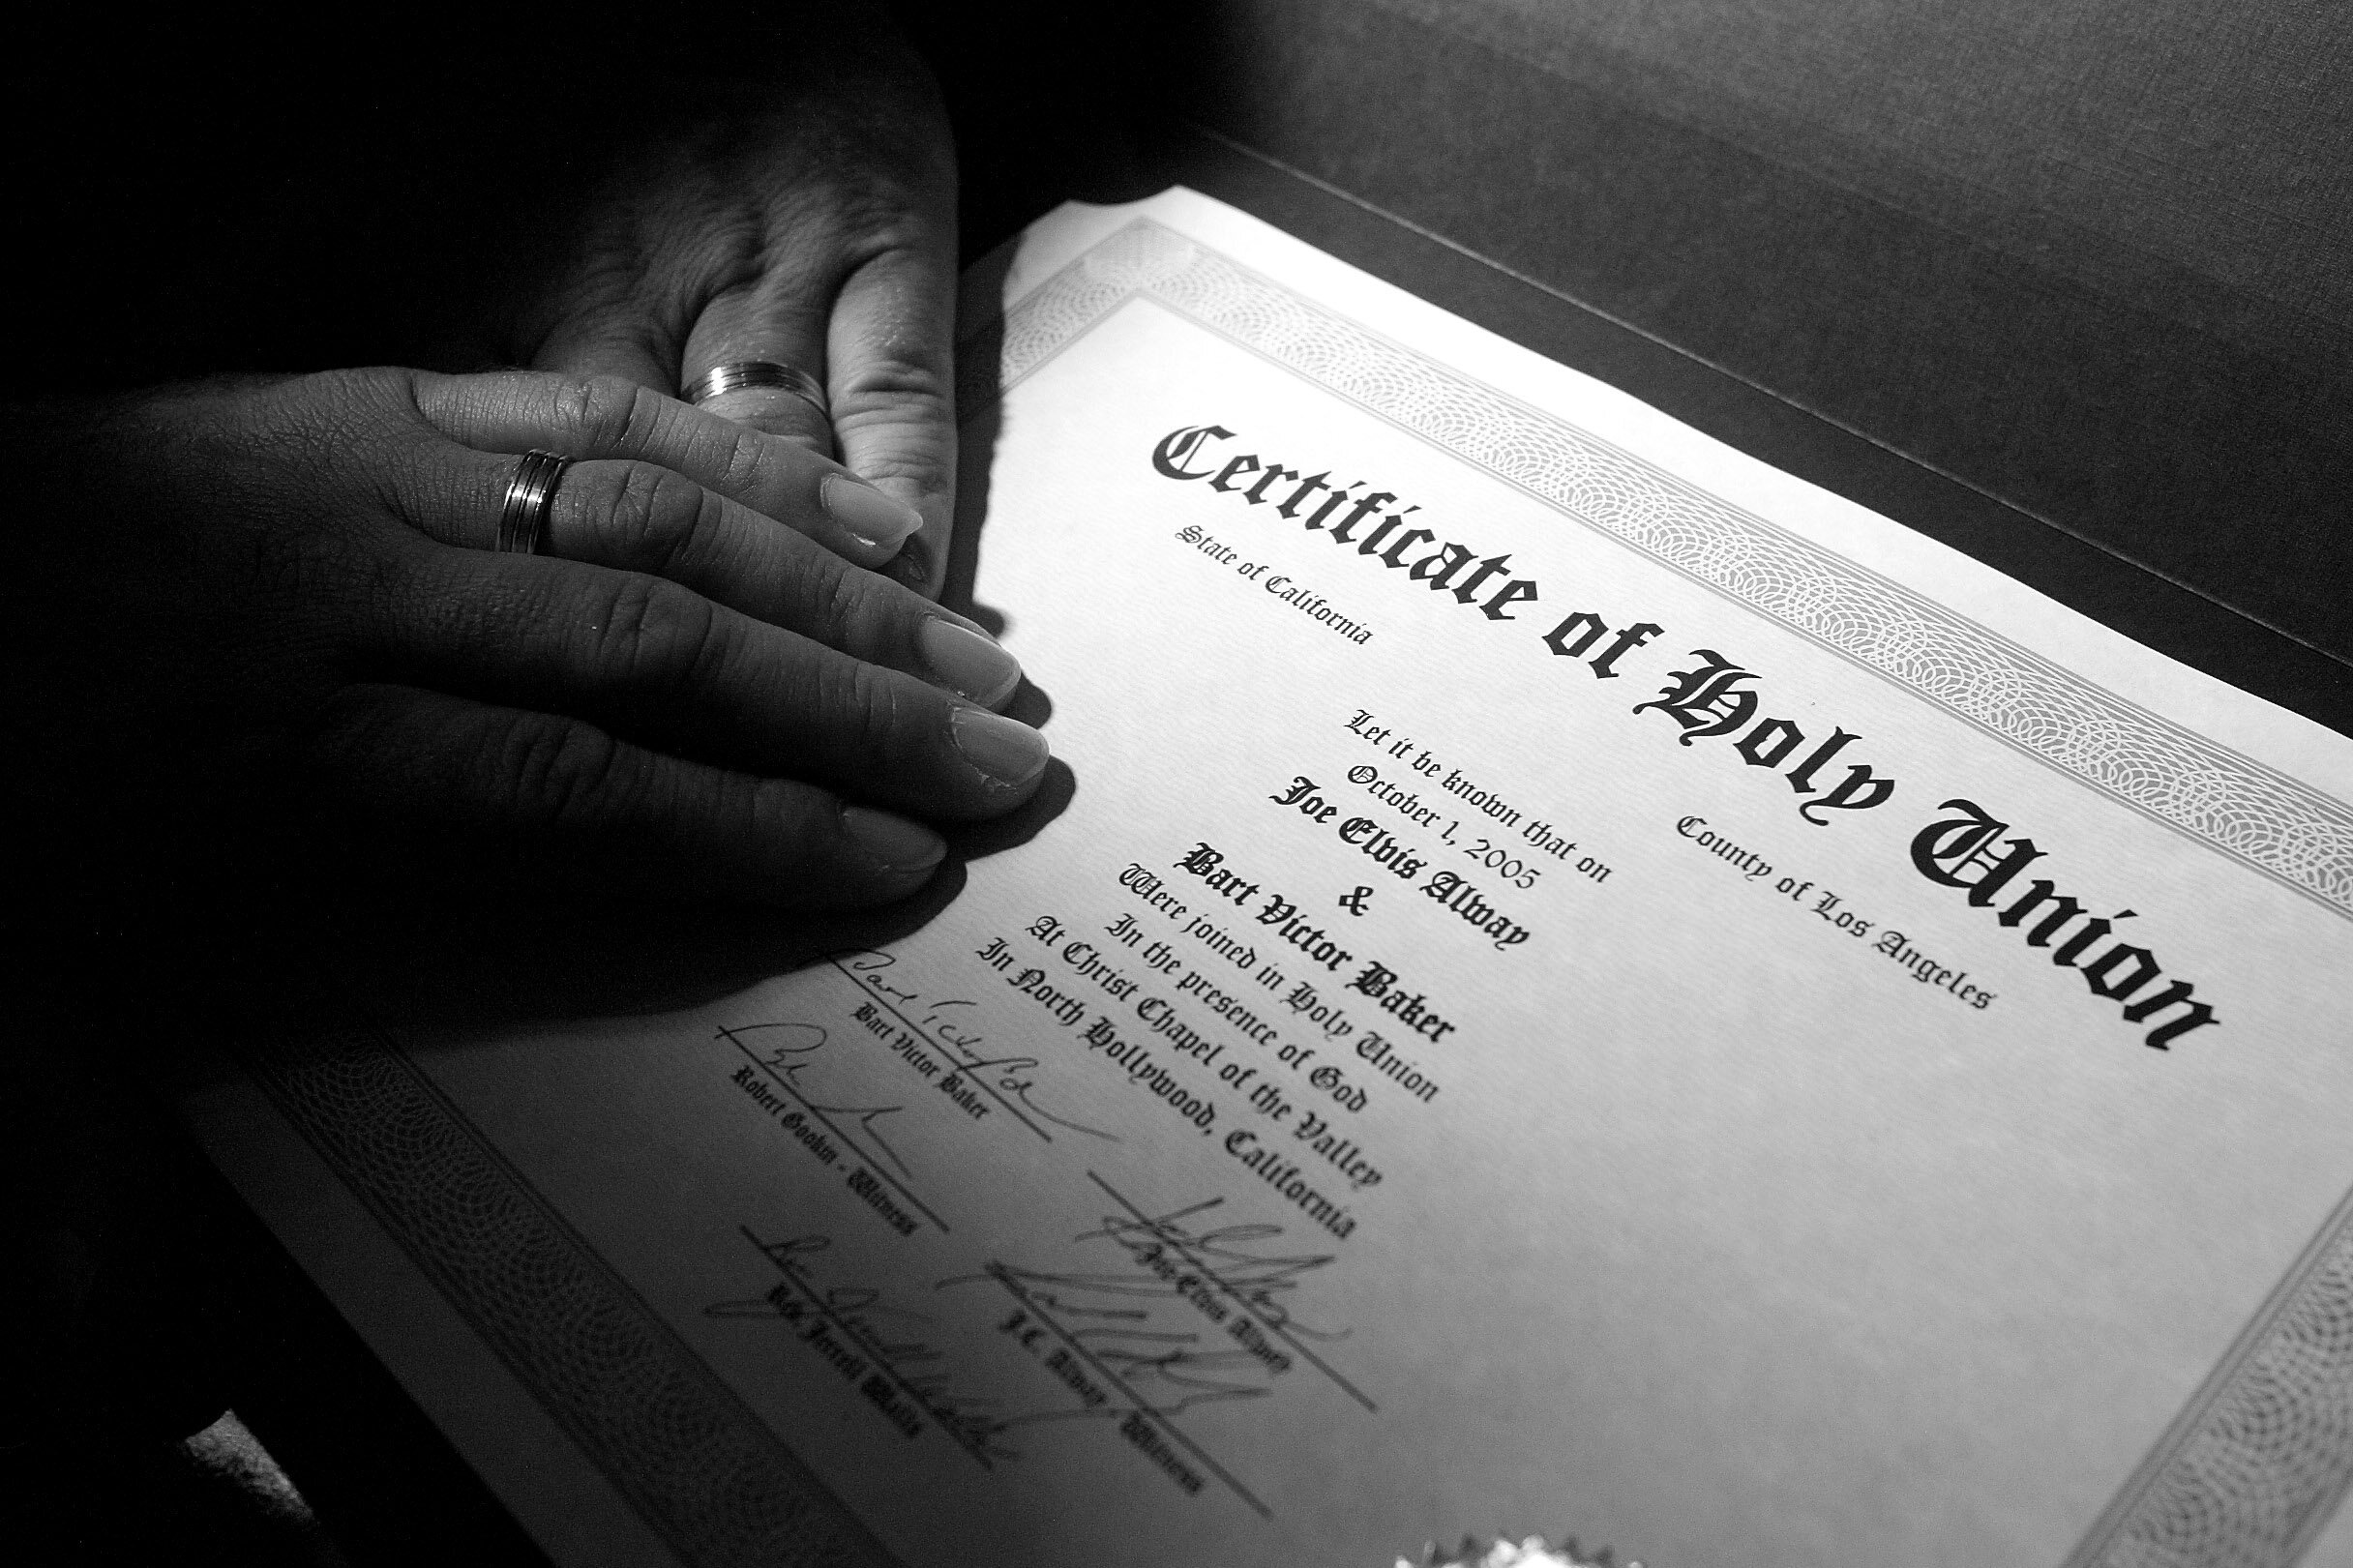  Bart and Joe’s certificate of Holy Union, recognizing their spiritual marriage.  